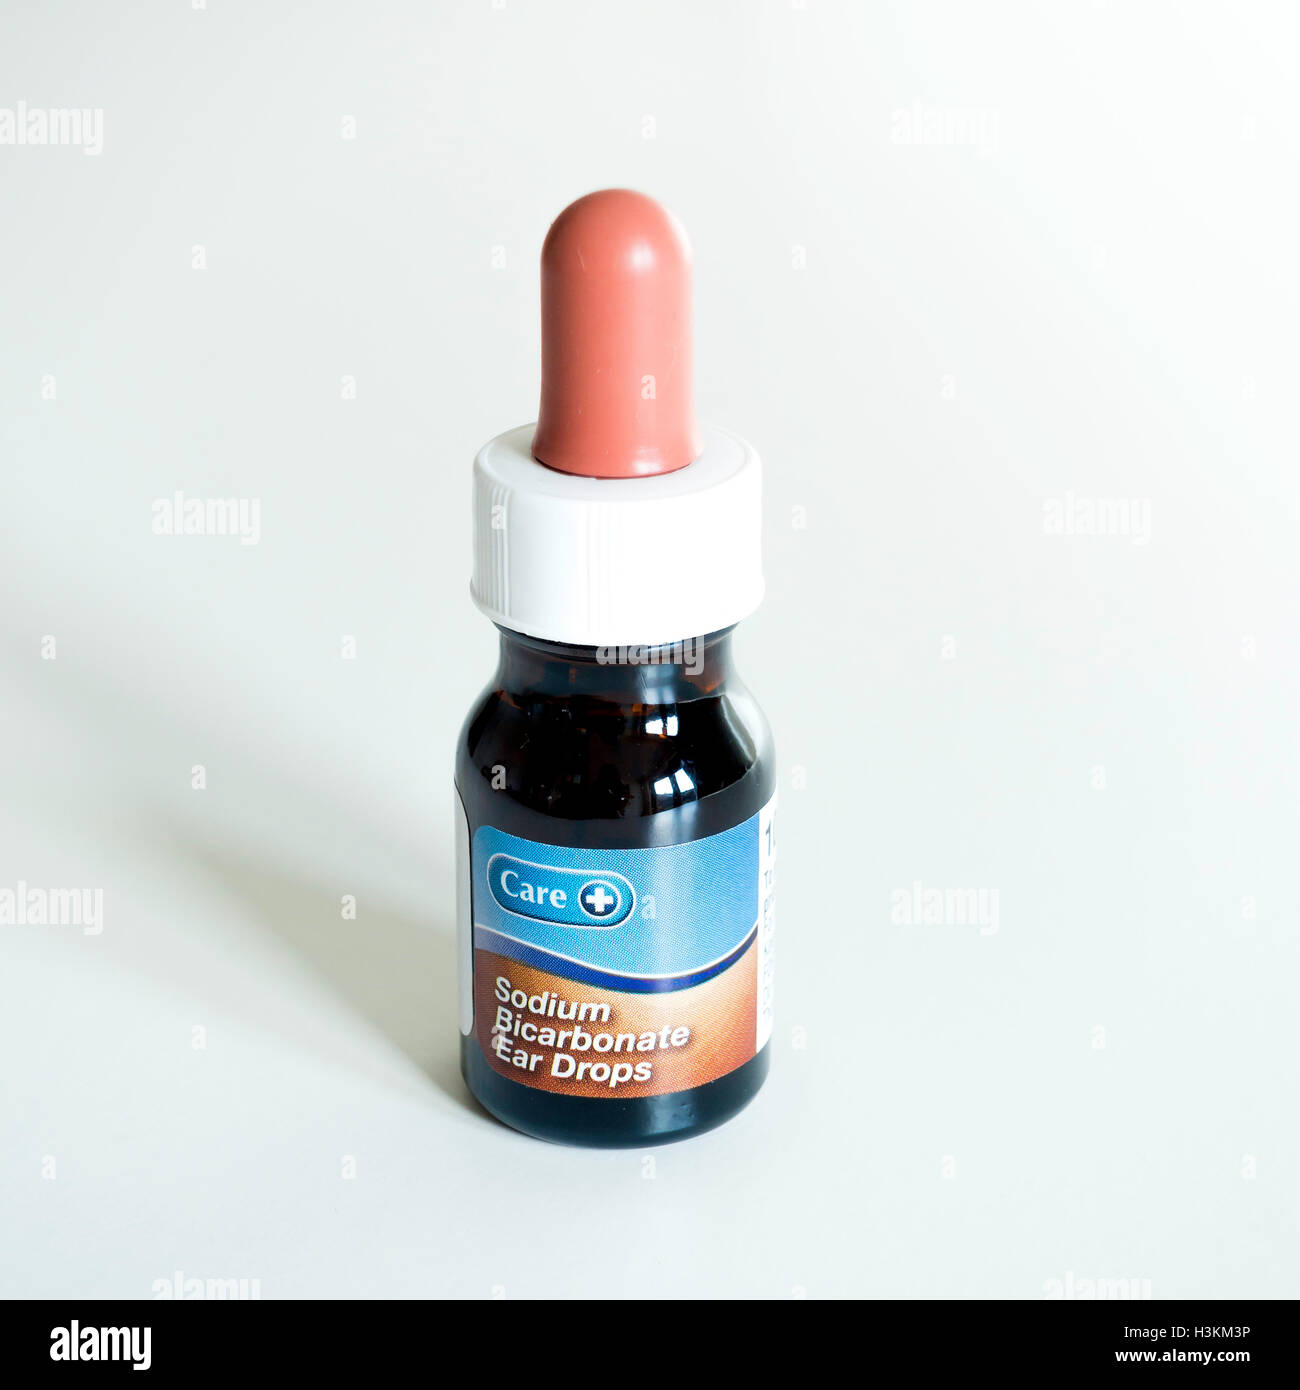 Sodium Bicarbonate Ear Drops for treating ear wax bottle with dropper Stock Photo